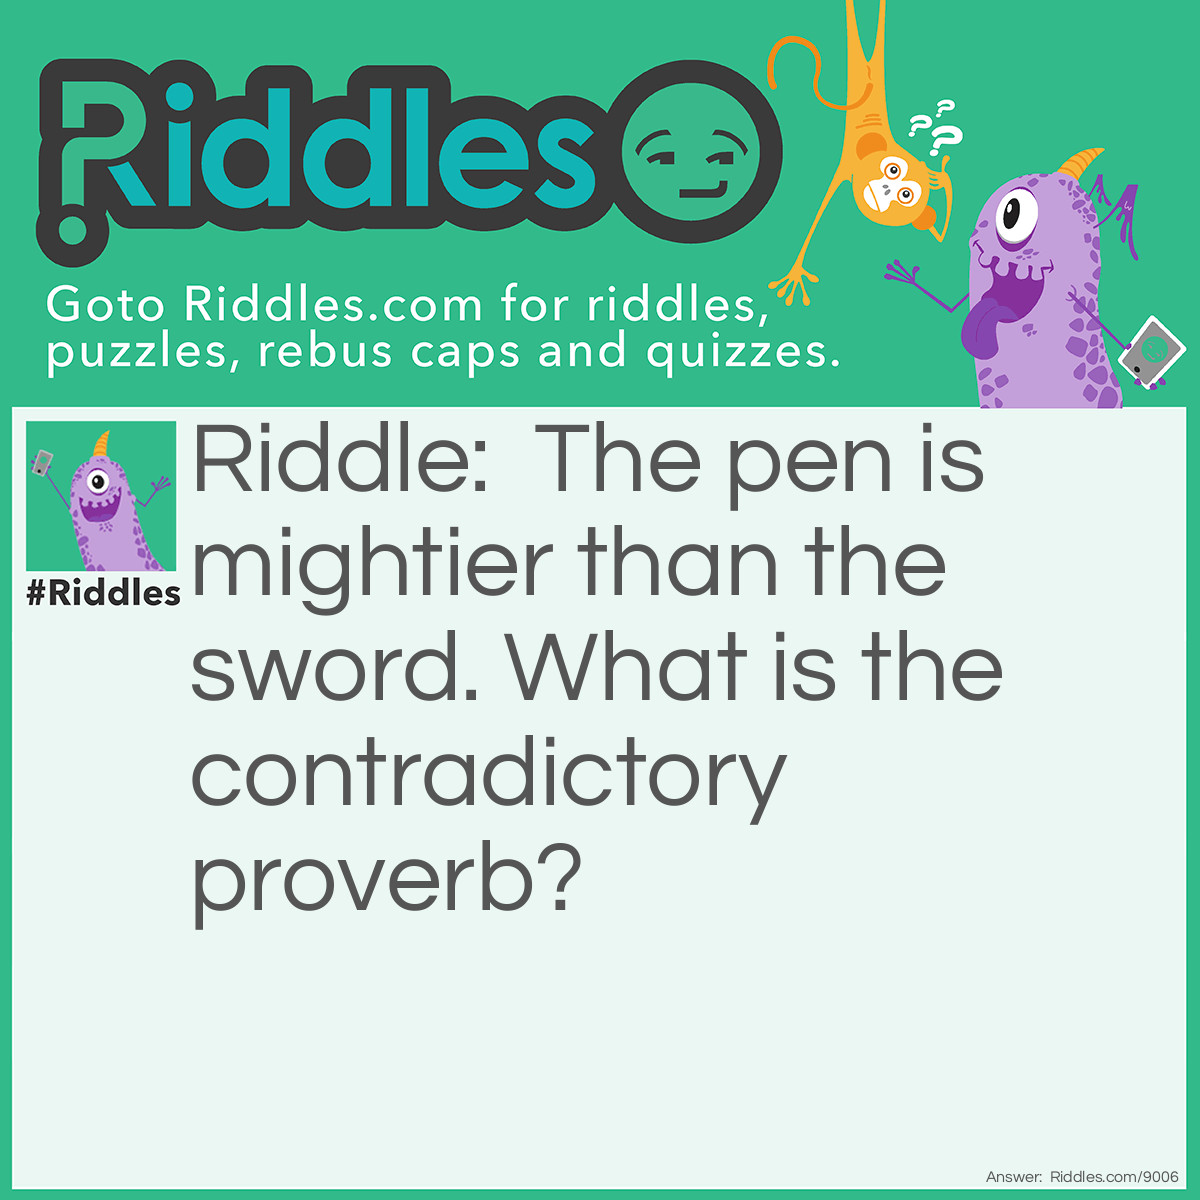 Riddle: The pen is mightier than the sword. What is the contradictory proverb? Answer: Actions speak louder than words.